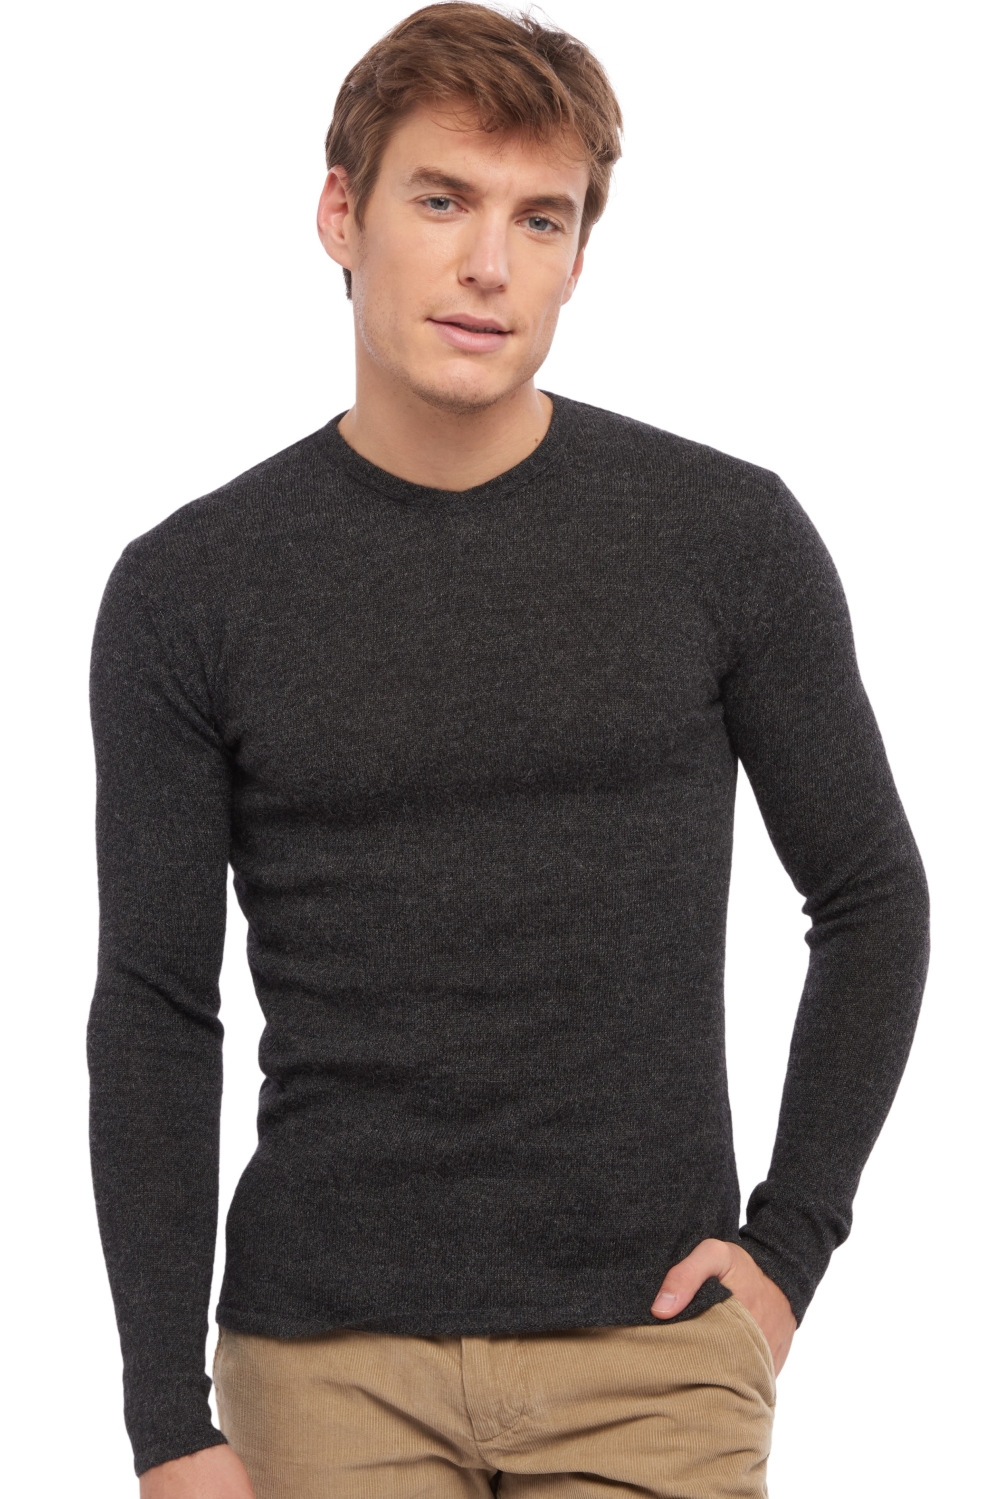 Baby Alpaga pull homme col v ethan anthracite chine s